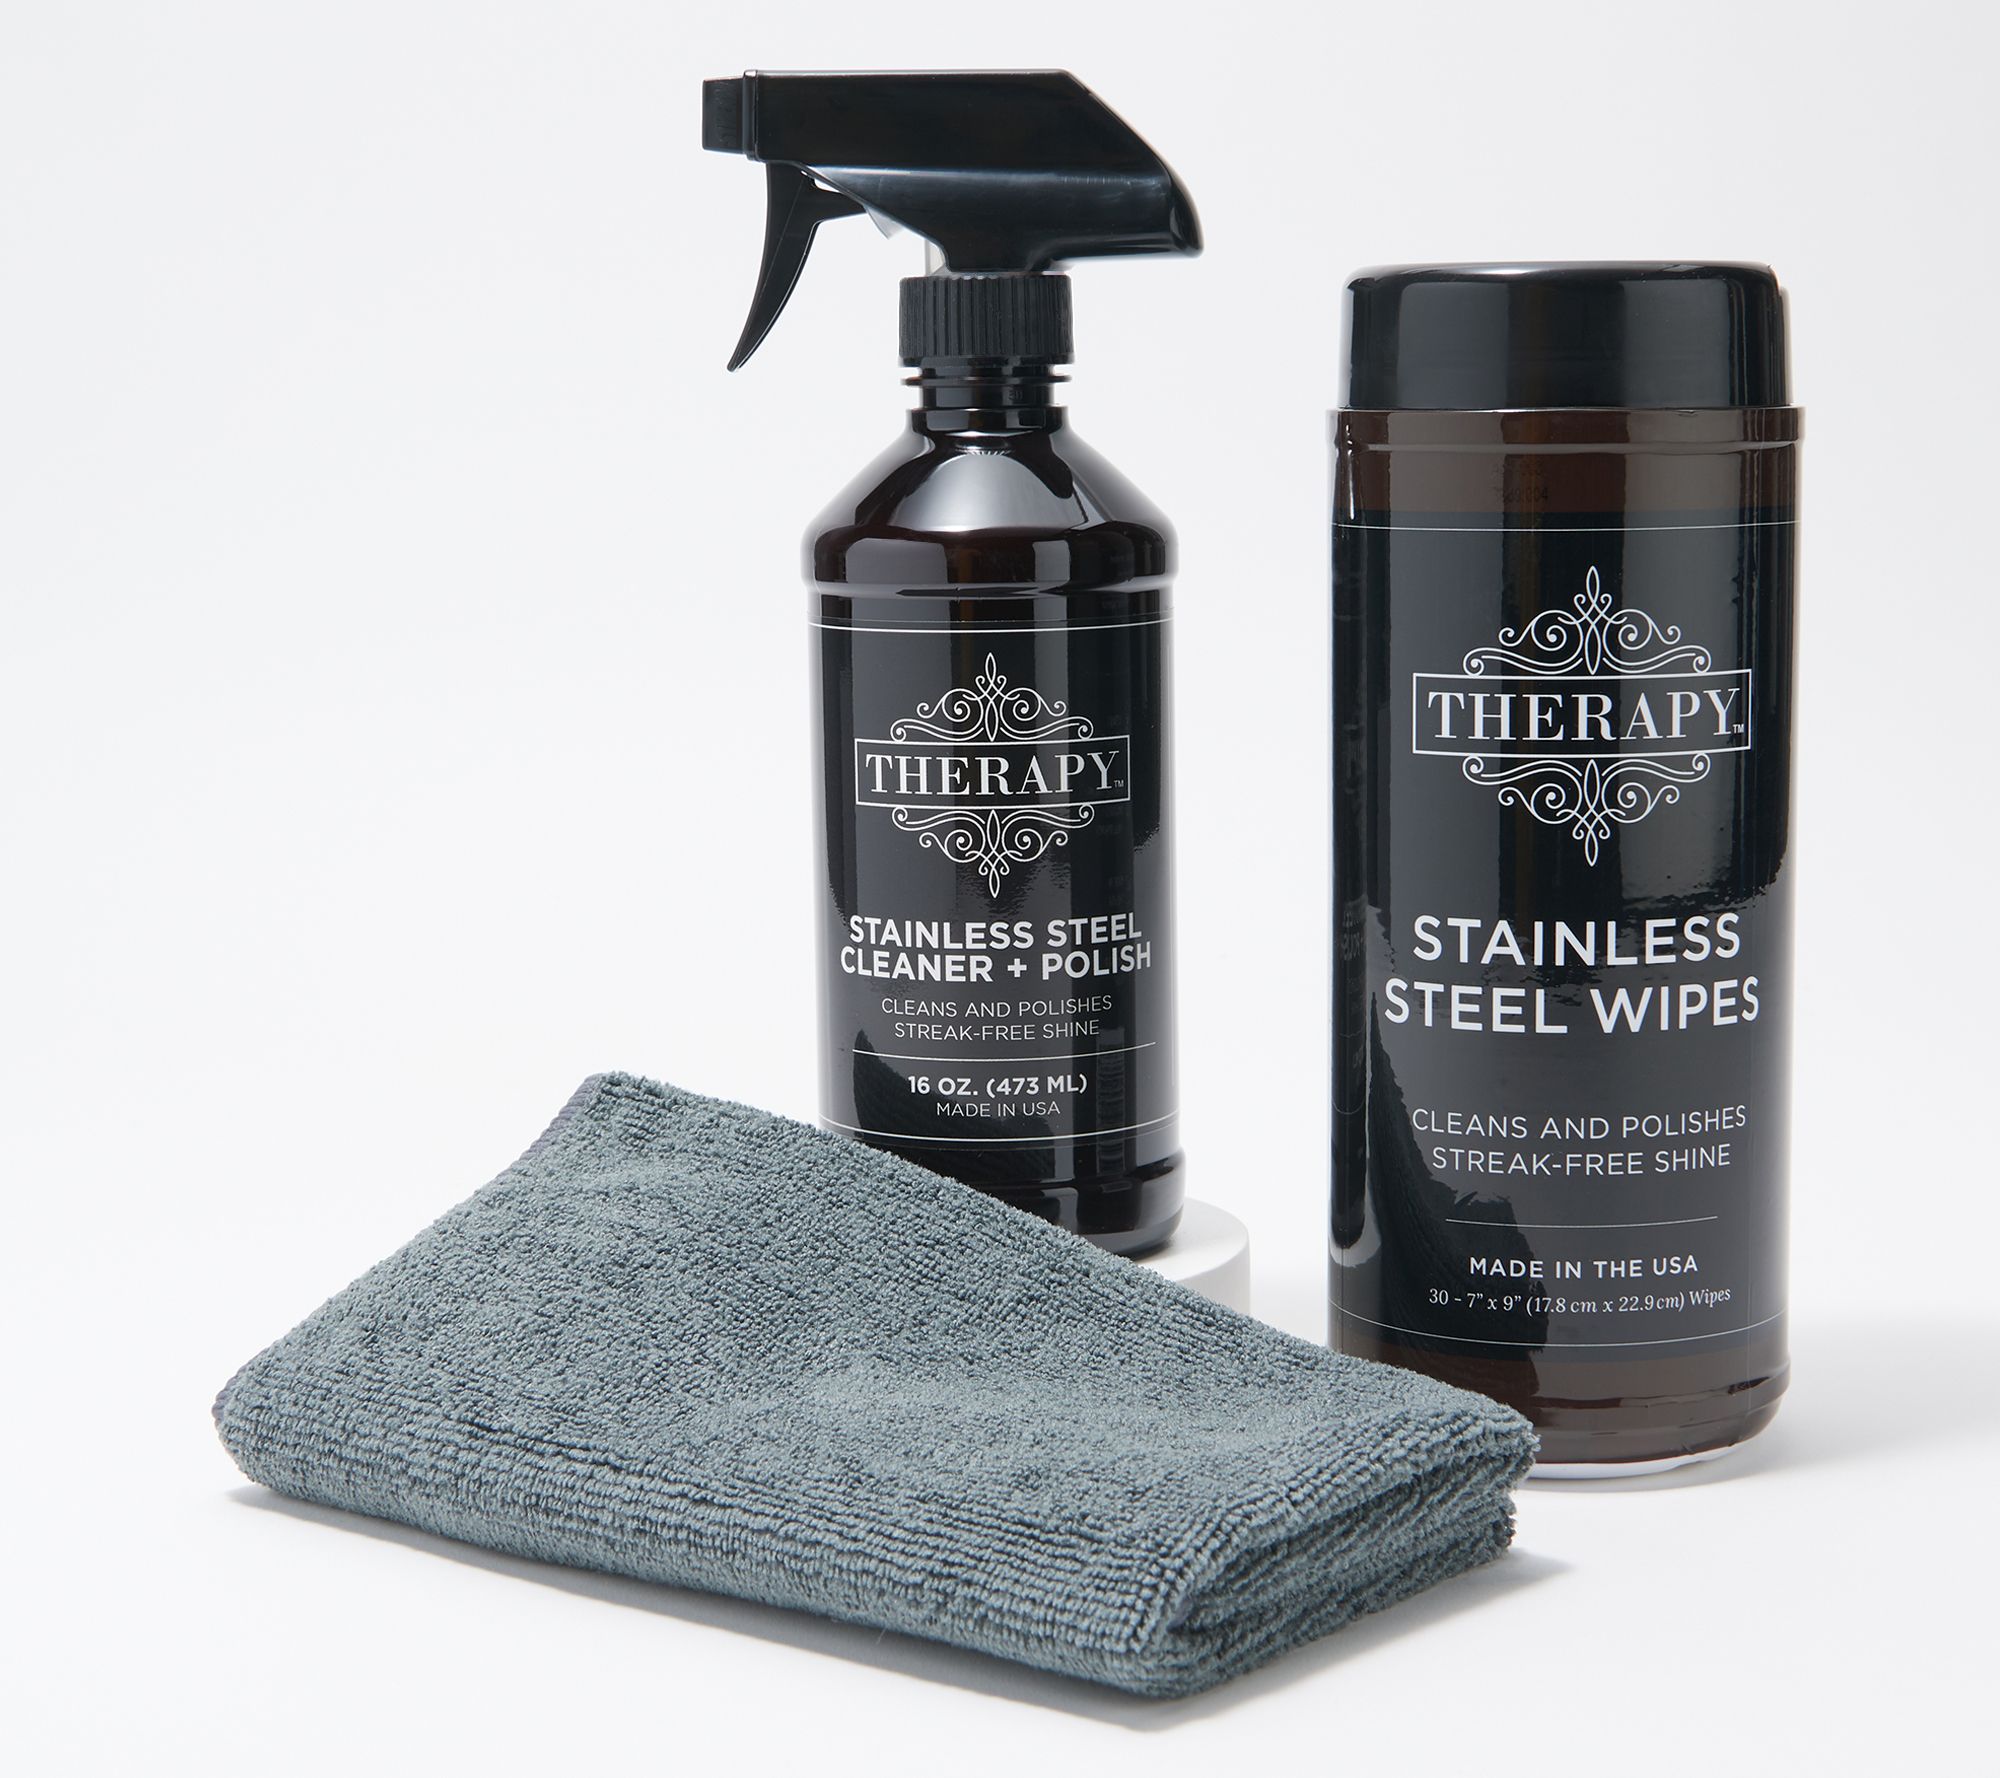 Therapy Stainless Steel Cleaner and Polish Kit with 30 Wipes - QVC.com Therapy Stainless Steel Cleaner & Polish